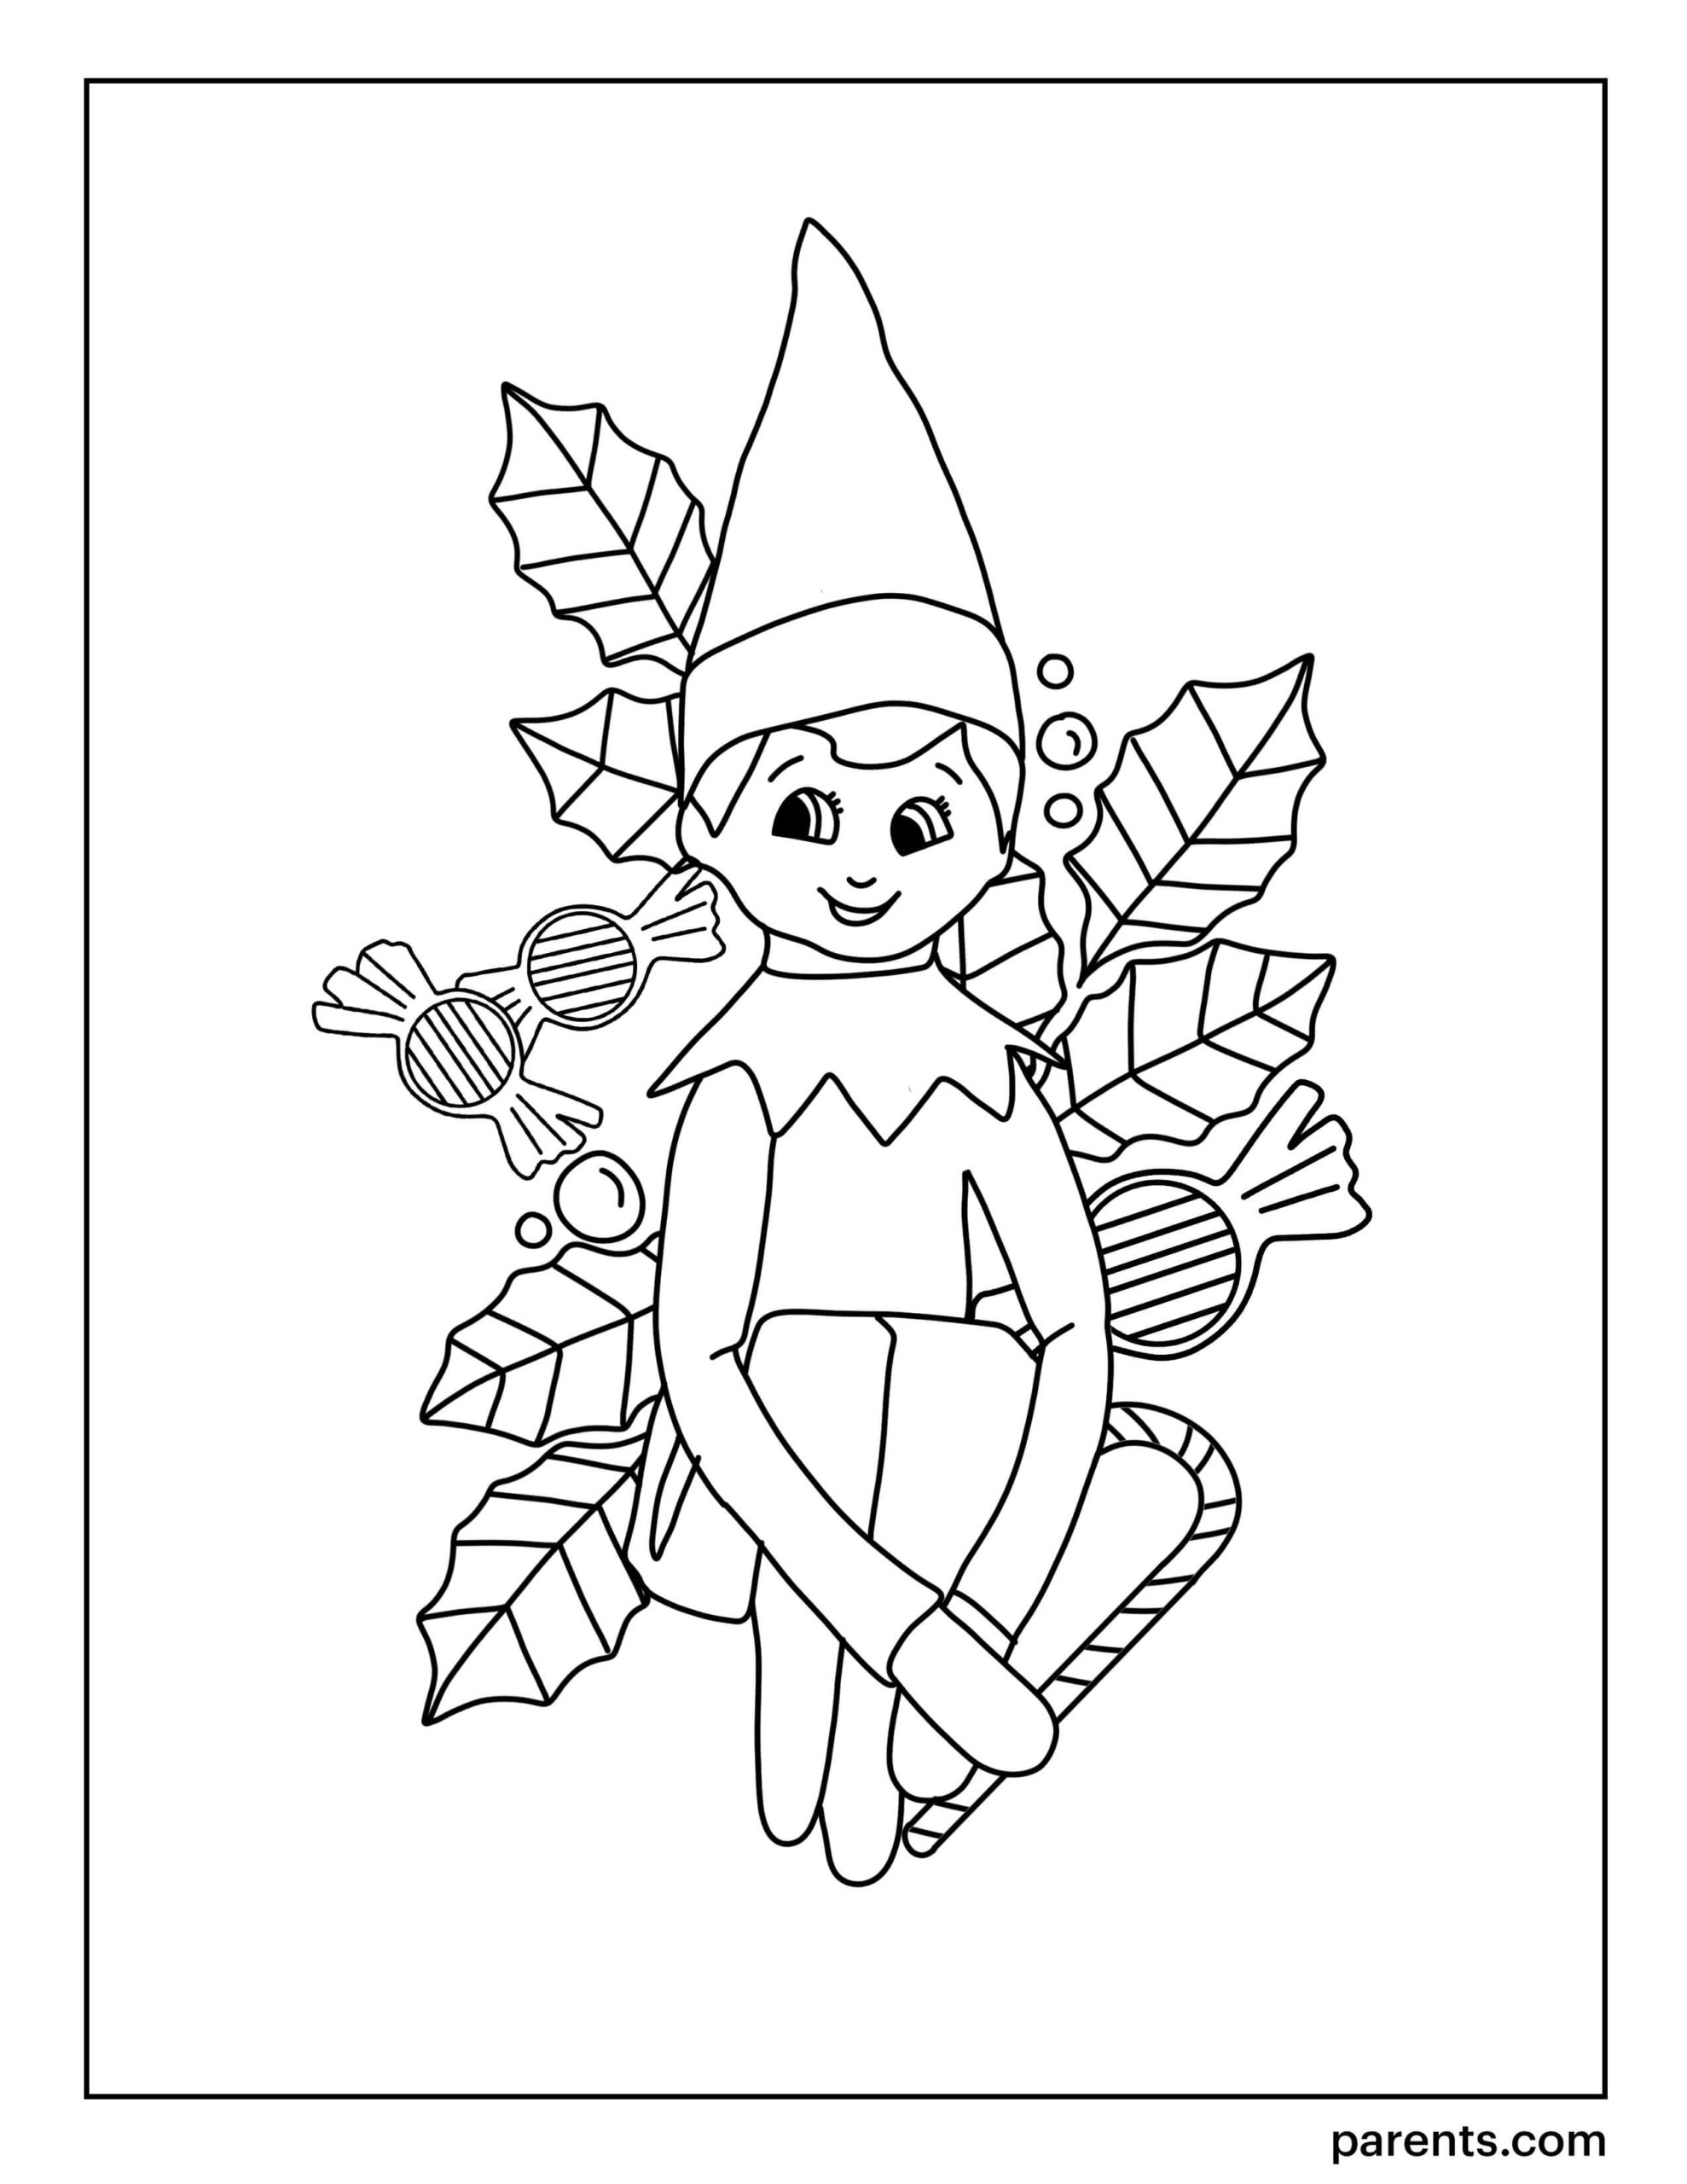 baby elf coloring pages | chippy the elf coloring pages | girl elf on the shelf coloring pages to print free